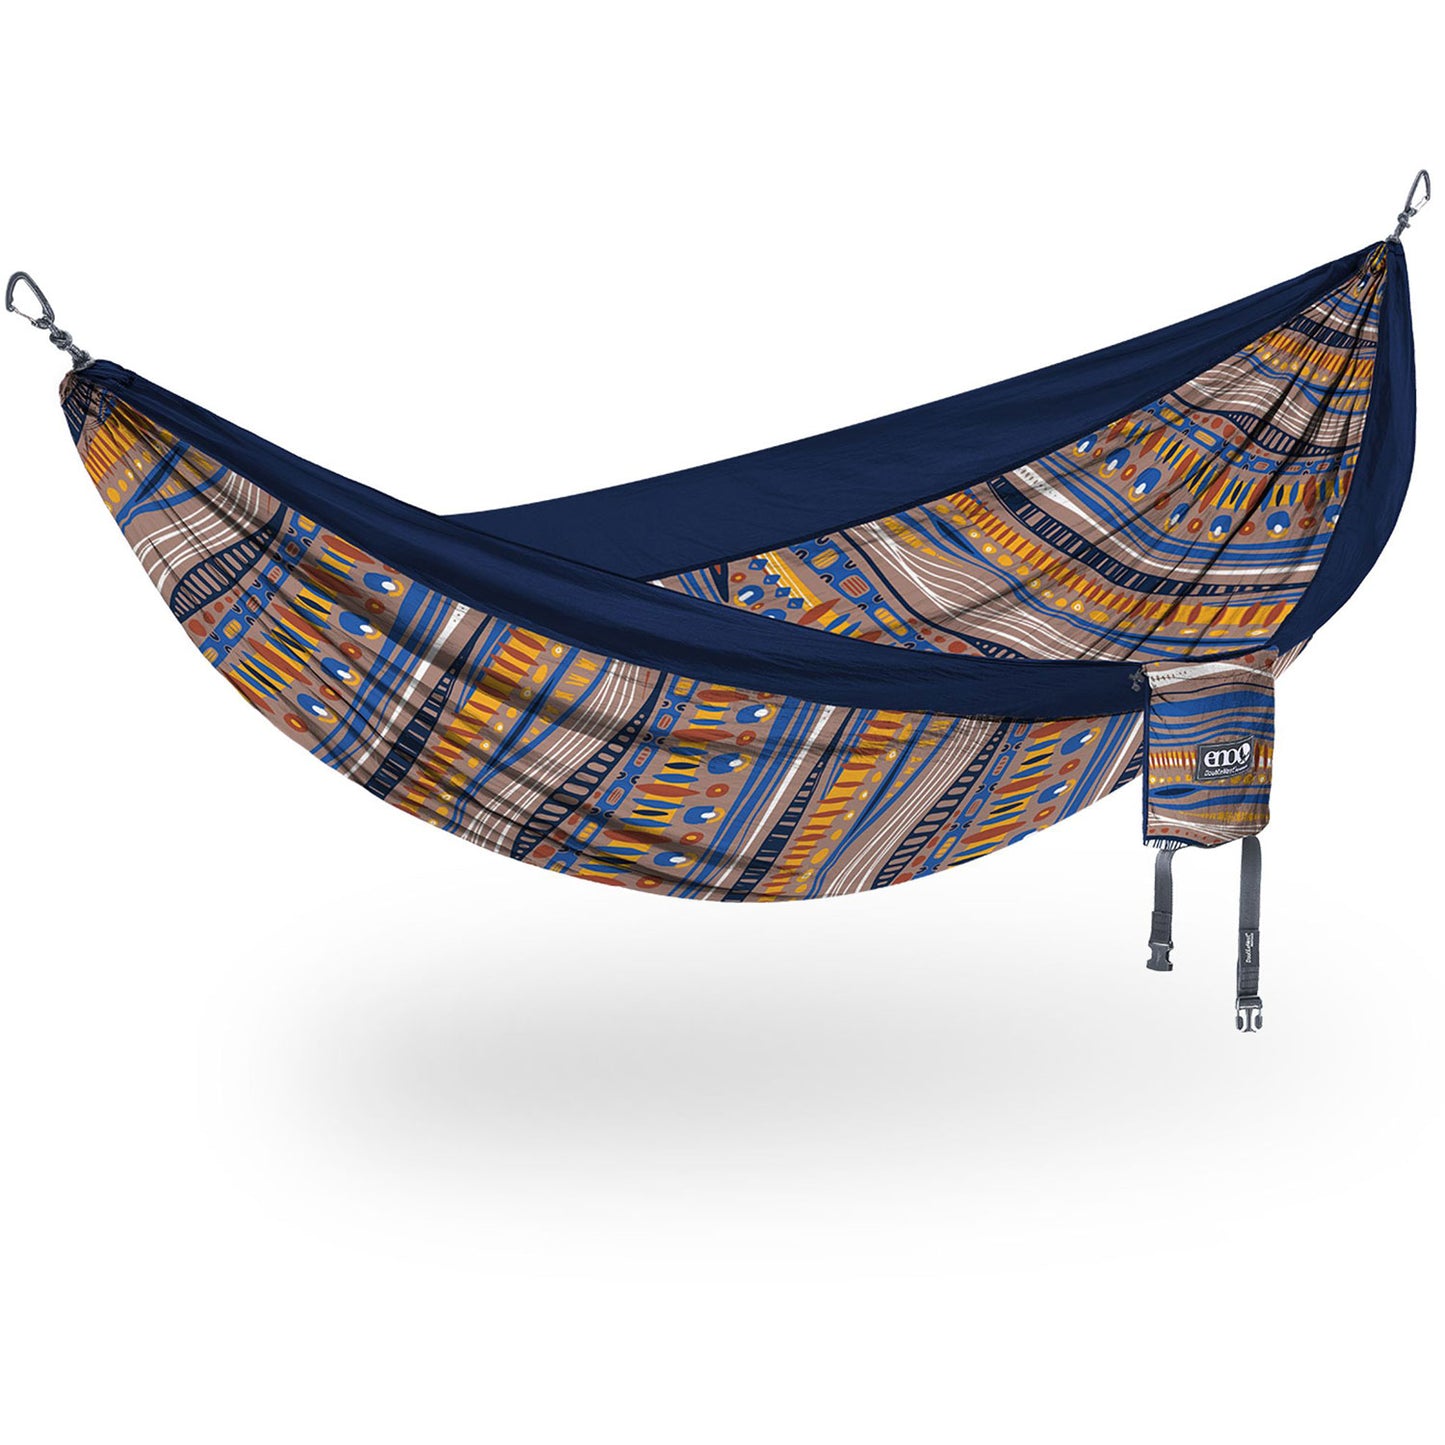 Eagles Nest Outfitters DoubleNest Hammock in Tundra/Navy angle